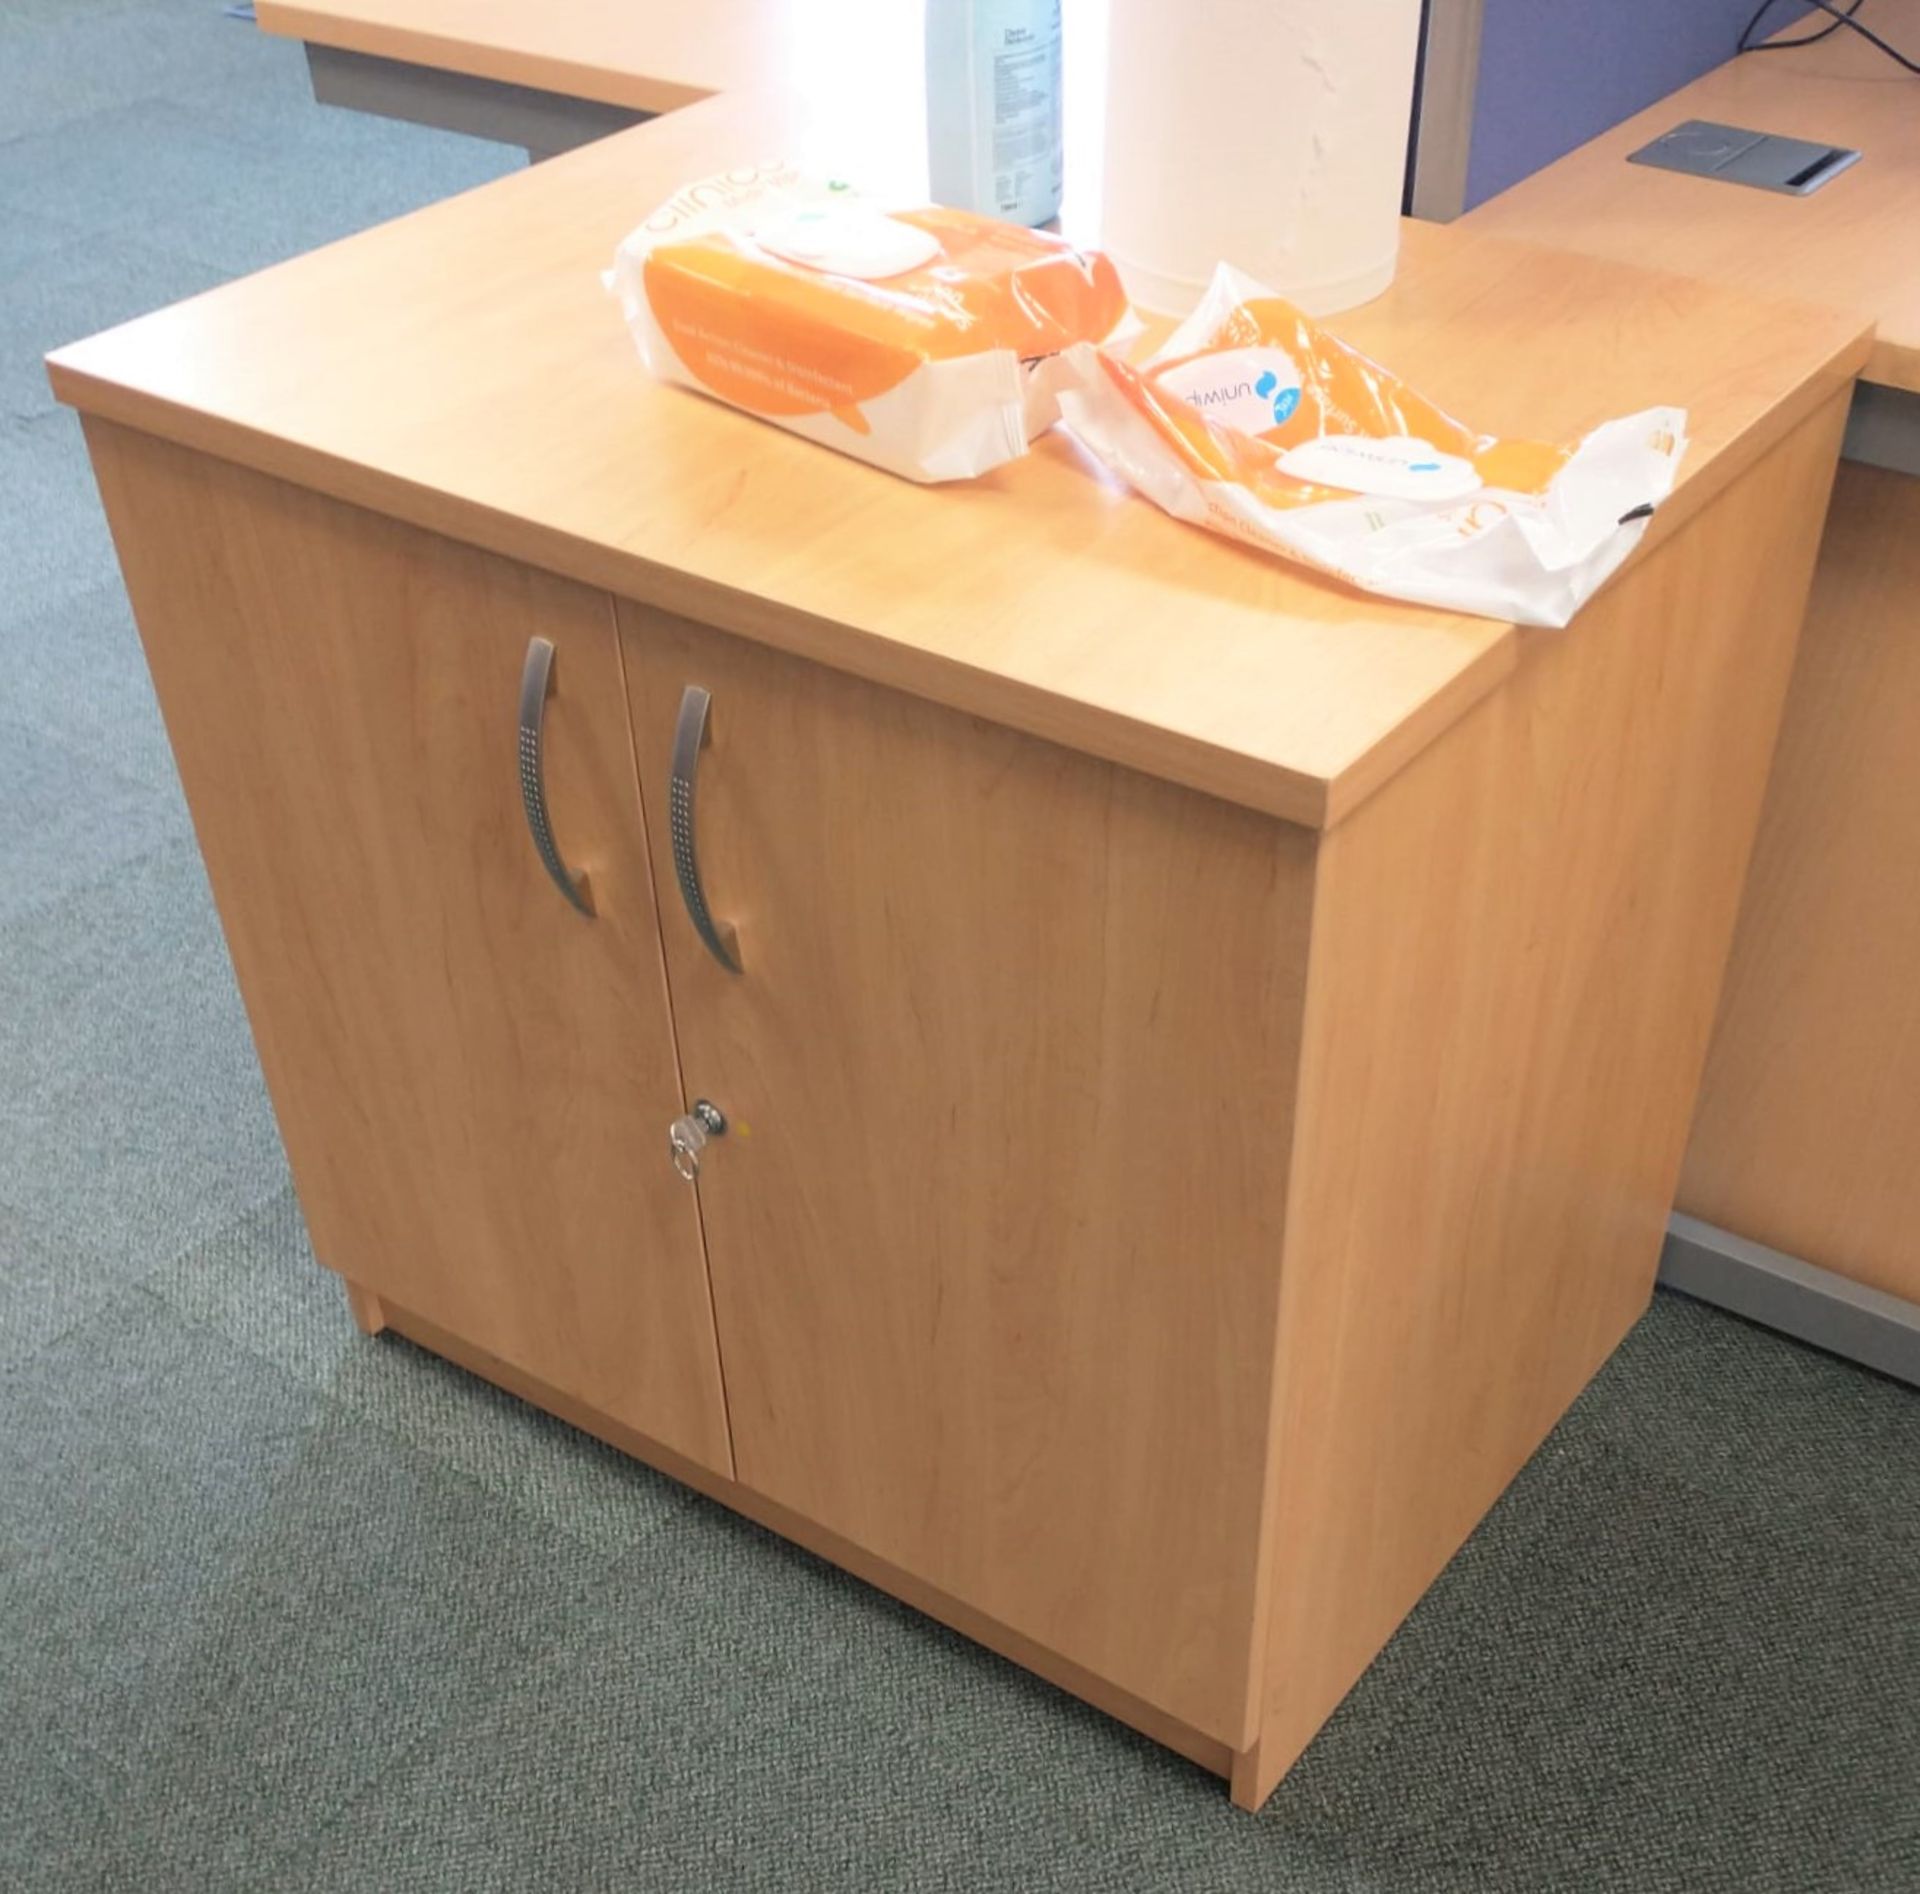 1 x Two Door Desk Height Office Storage Cupboard With a Beech Finish - Ref: 1 x AC004 - Location: